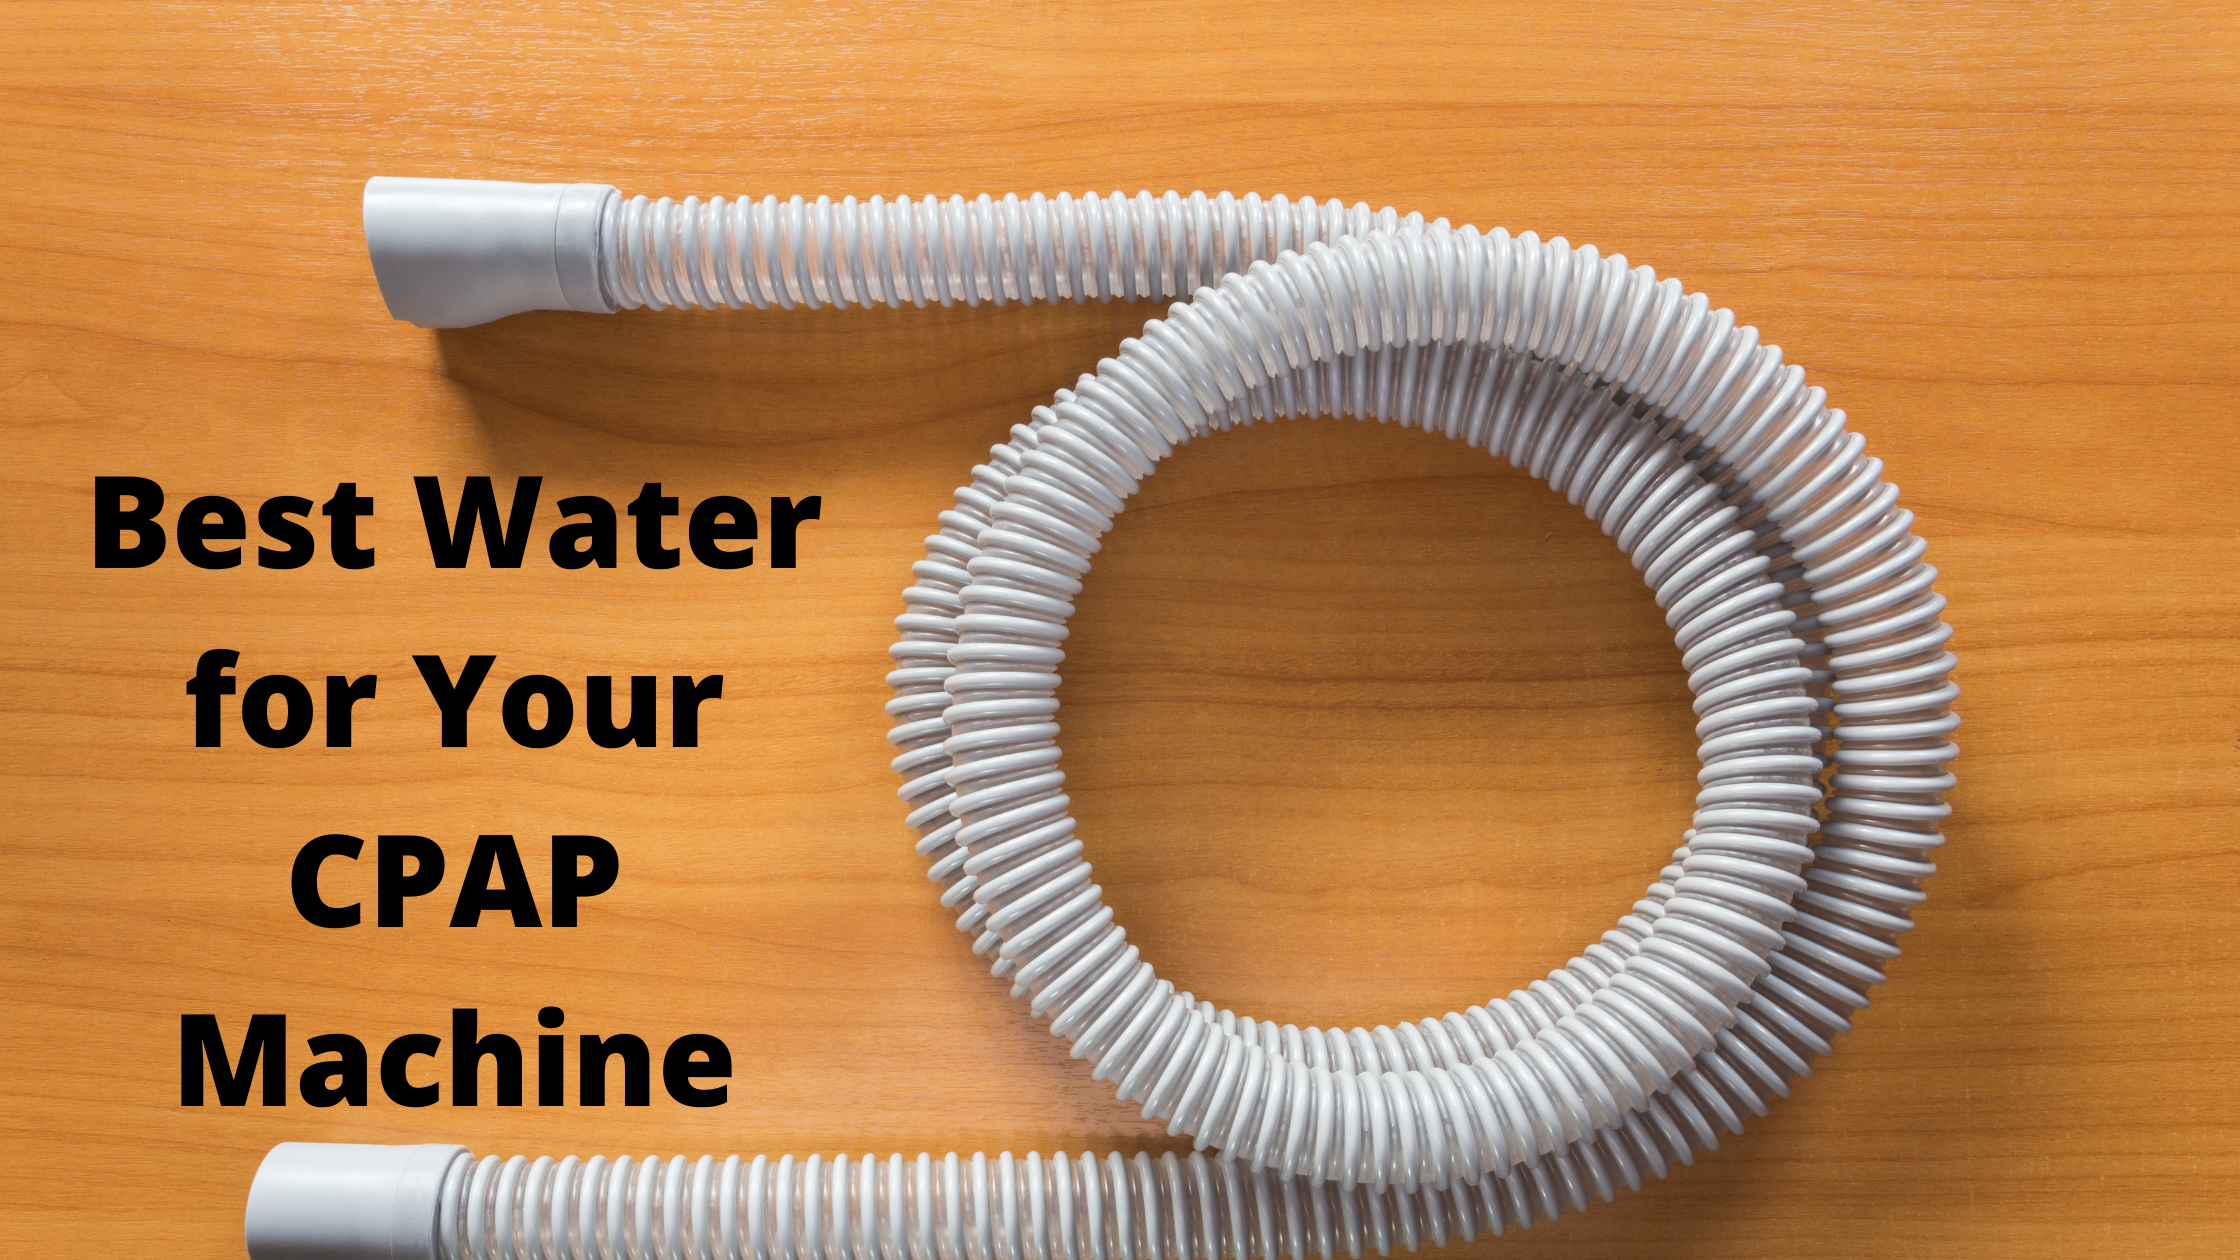 Best Water for Your CPAP Machine